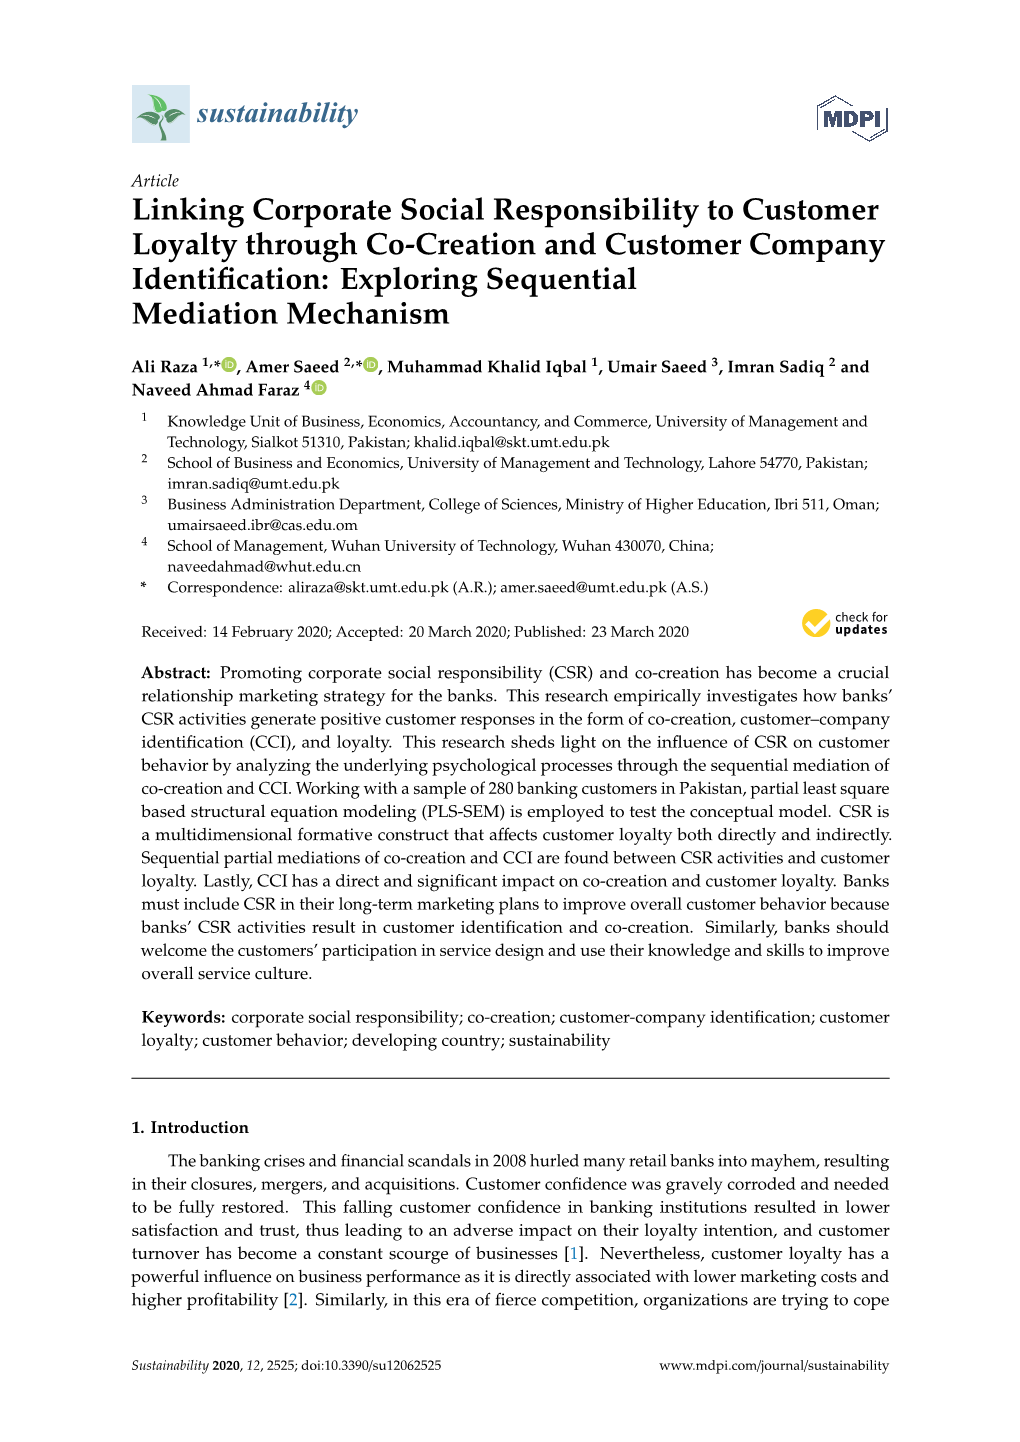 Linking Corporate Social Responsibility to Customer Loyalty Through Co-Creation and Customer Company Identiﬁcation: Exploring Sequential Mediation Mechanism